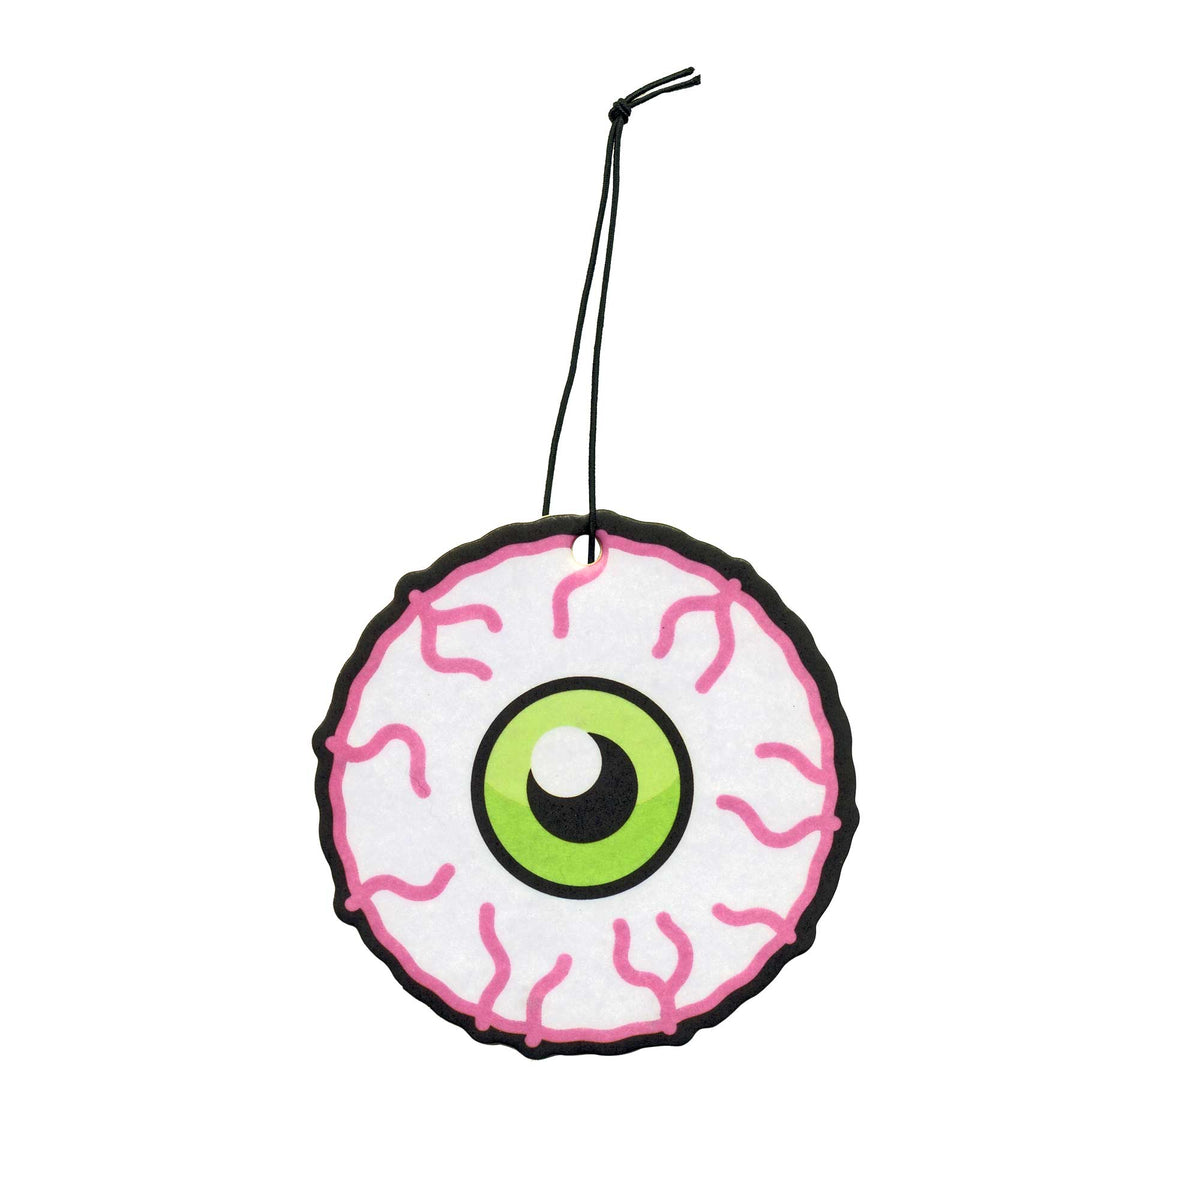 Jeepers Peepers Air Freshener